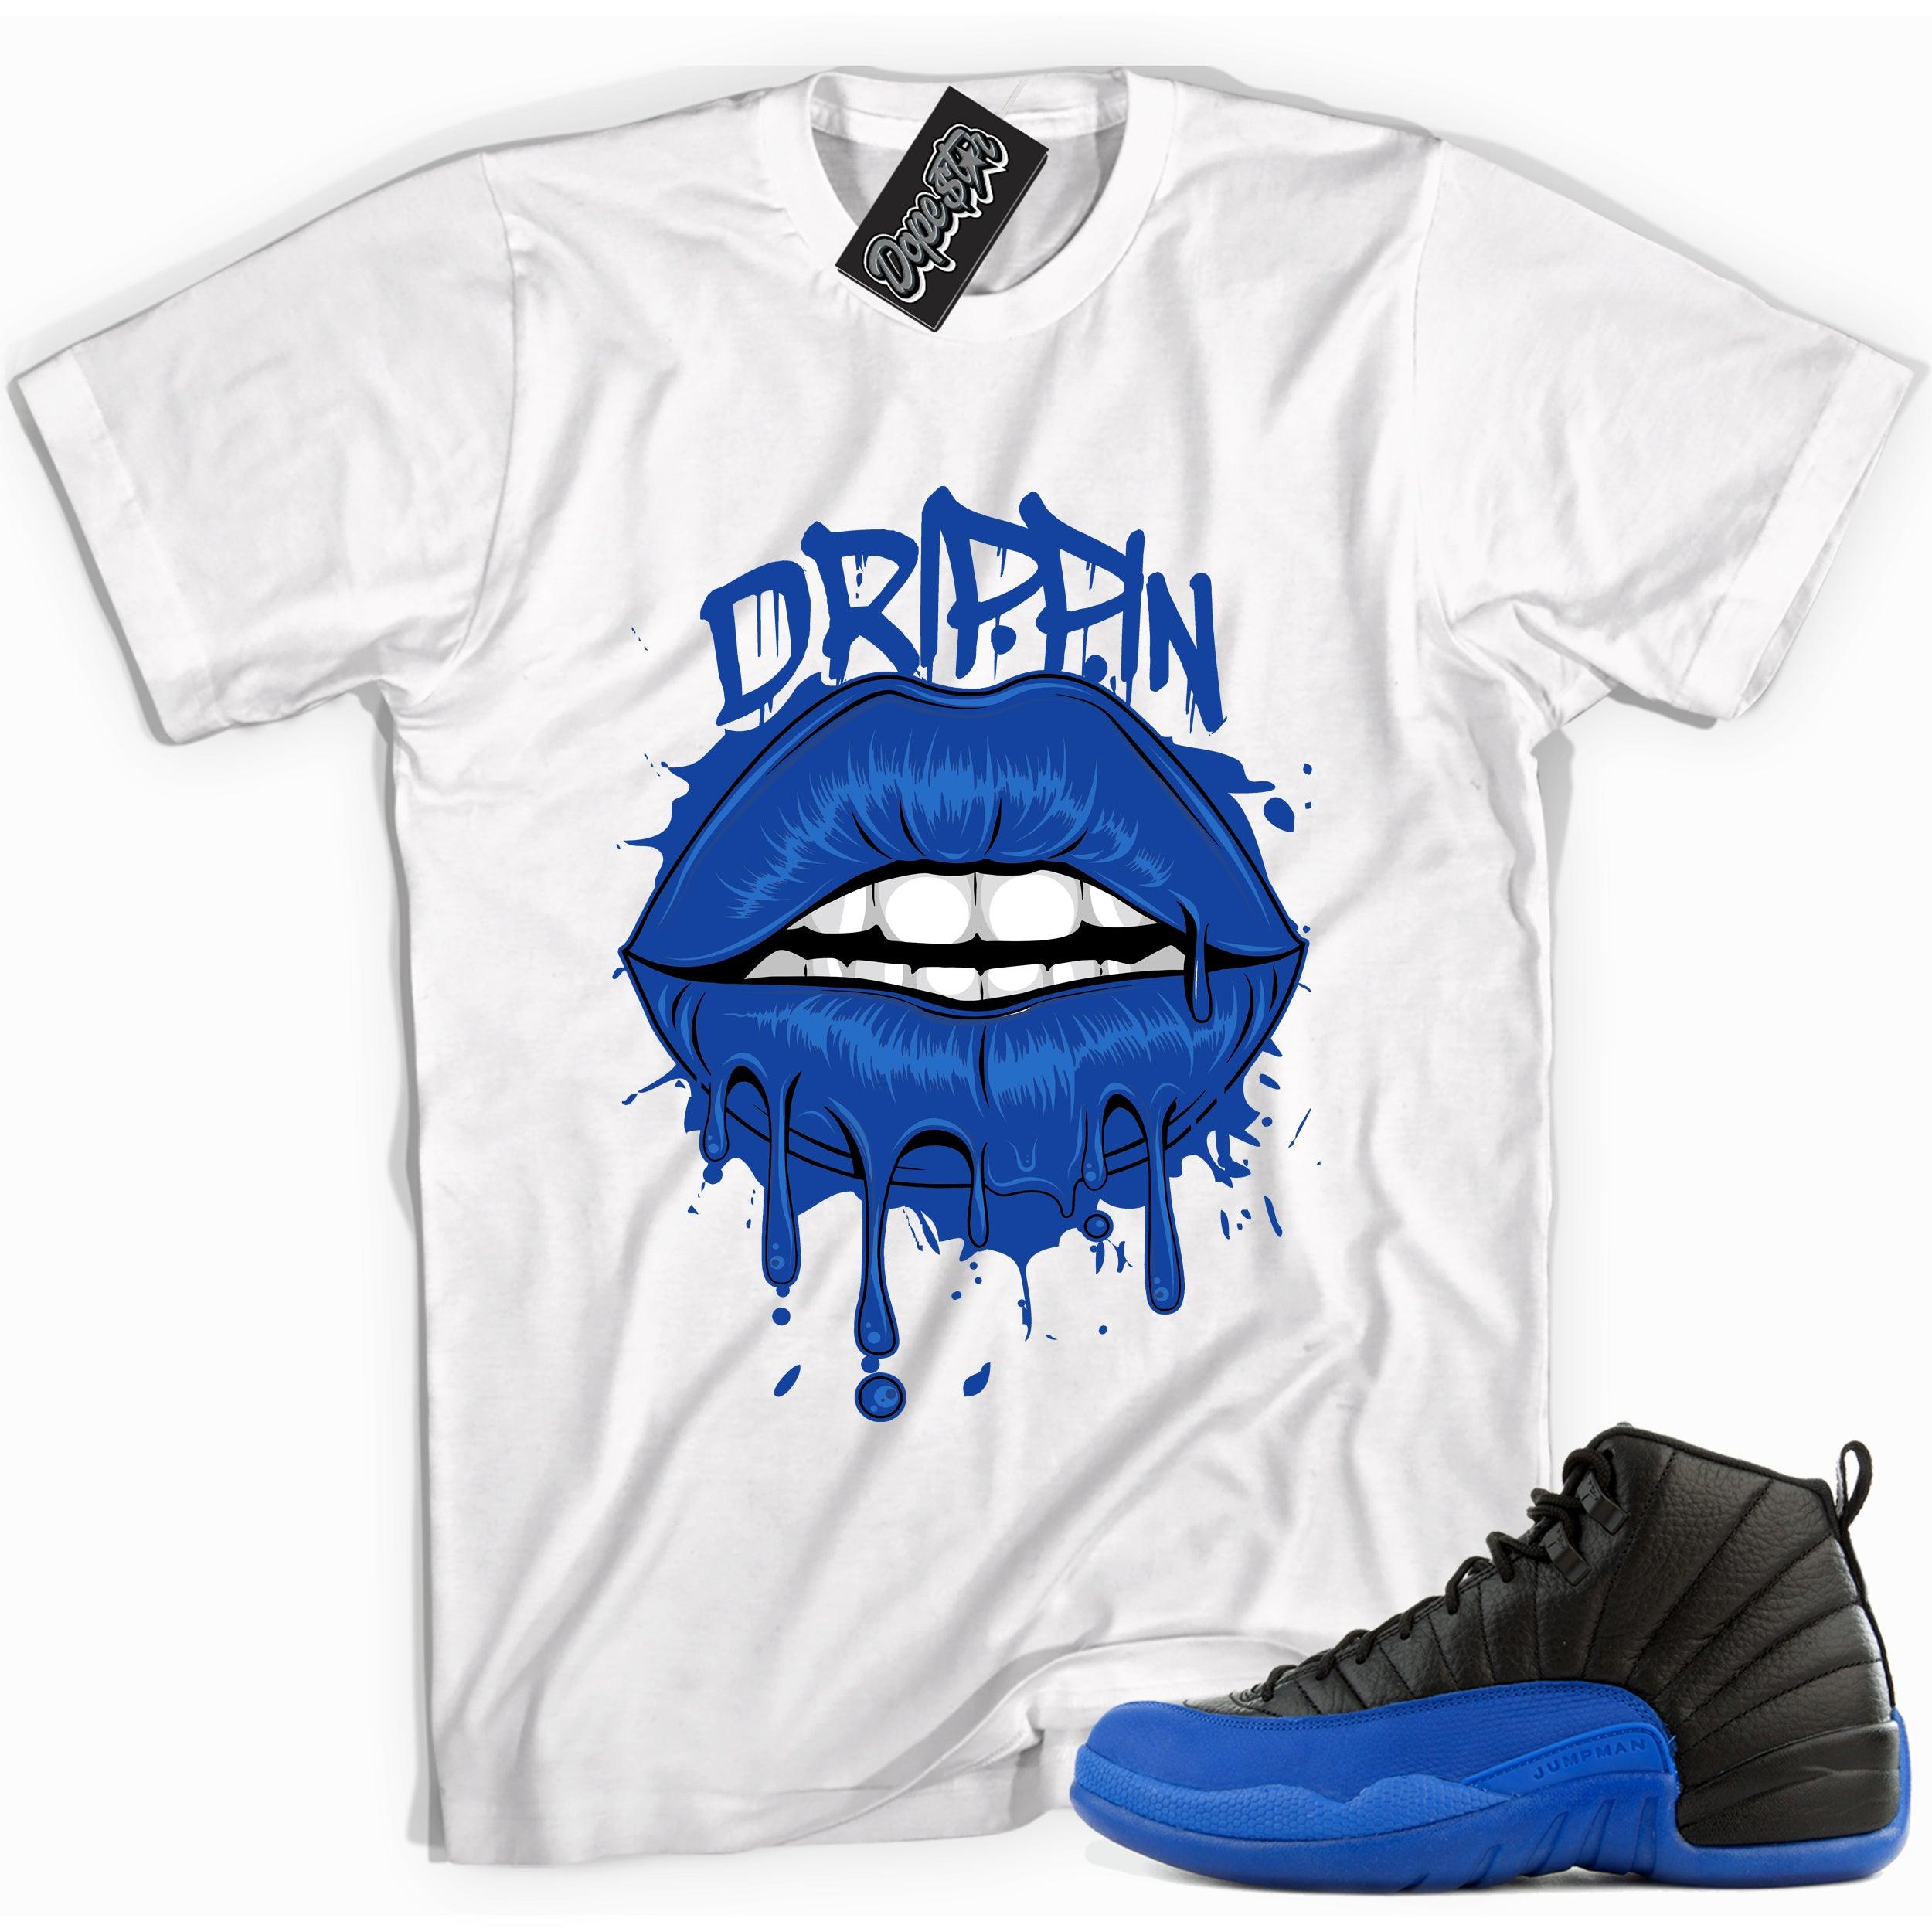 Cool white graphic tee with 'drippin' print, that perfectly matches Air Jordan 12 Retro Black Game Royal sneakers.